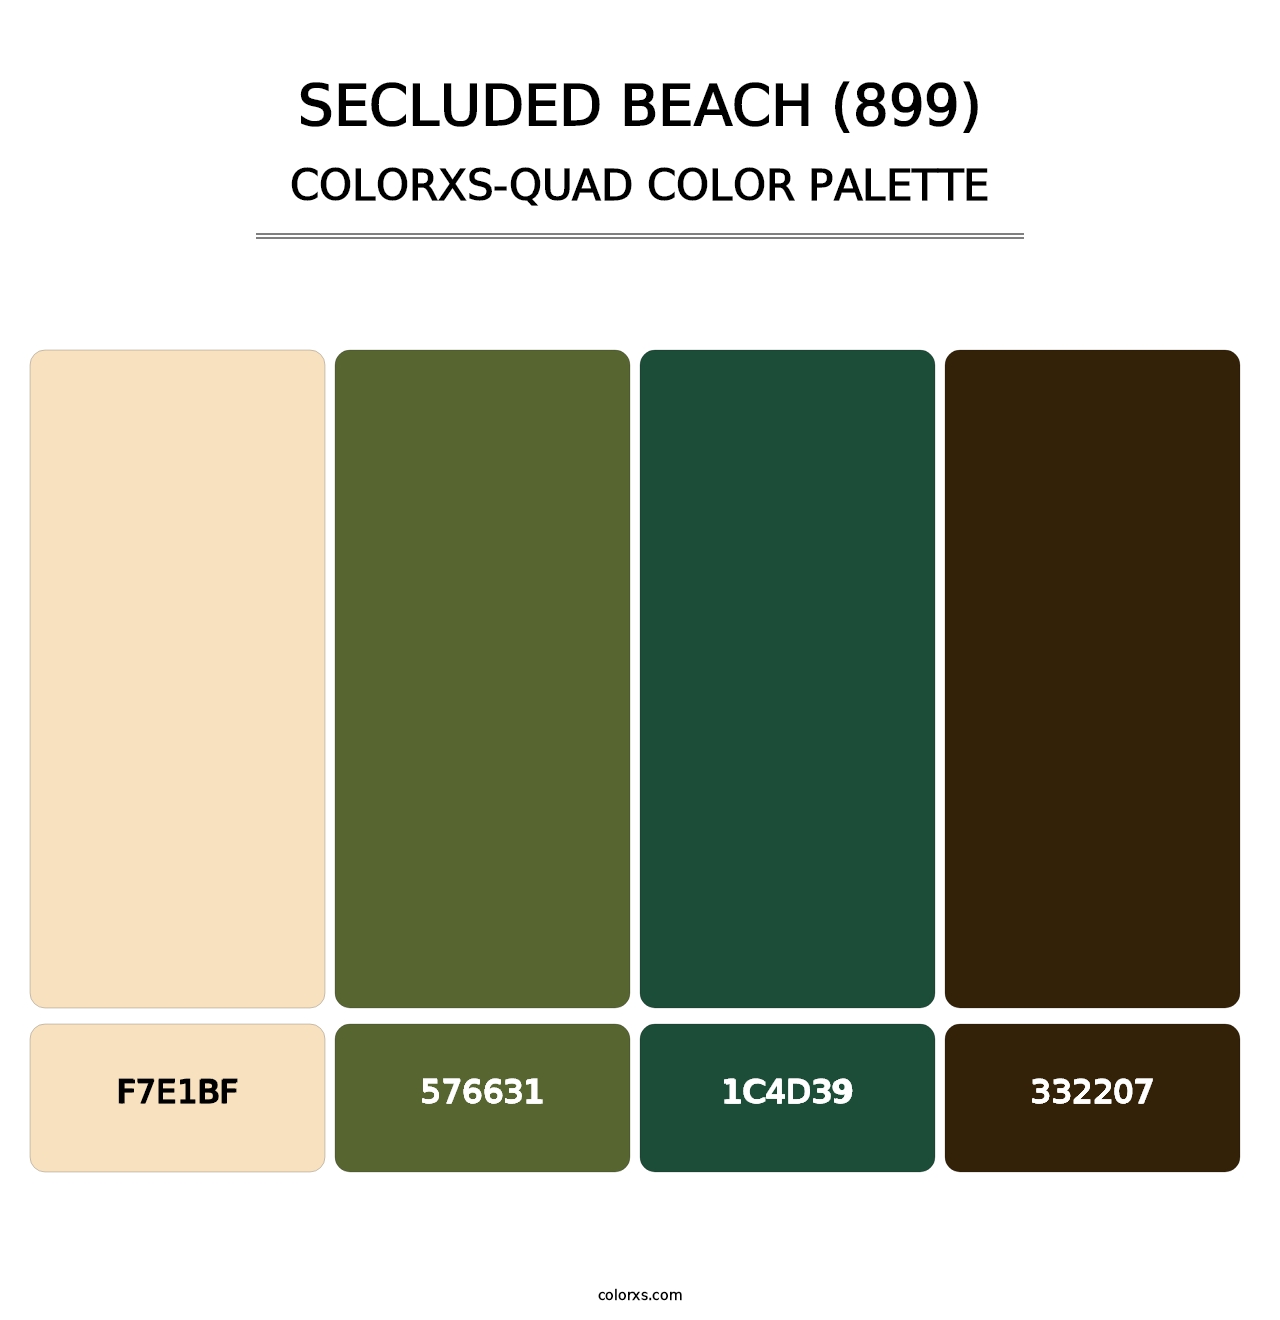 Secluded Beach (899) - Colorxs Quad Palette